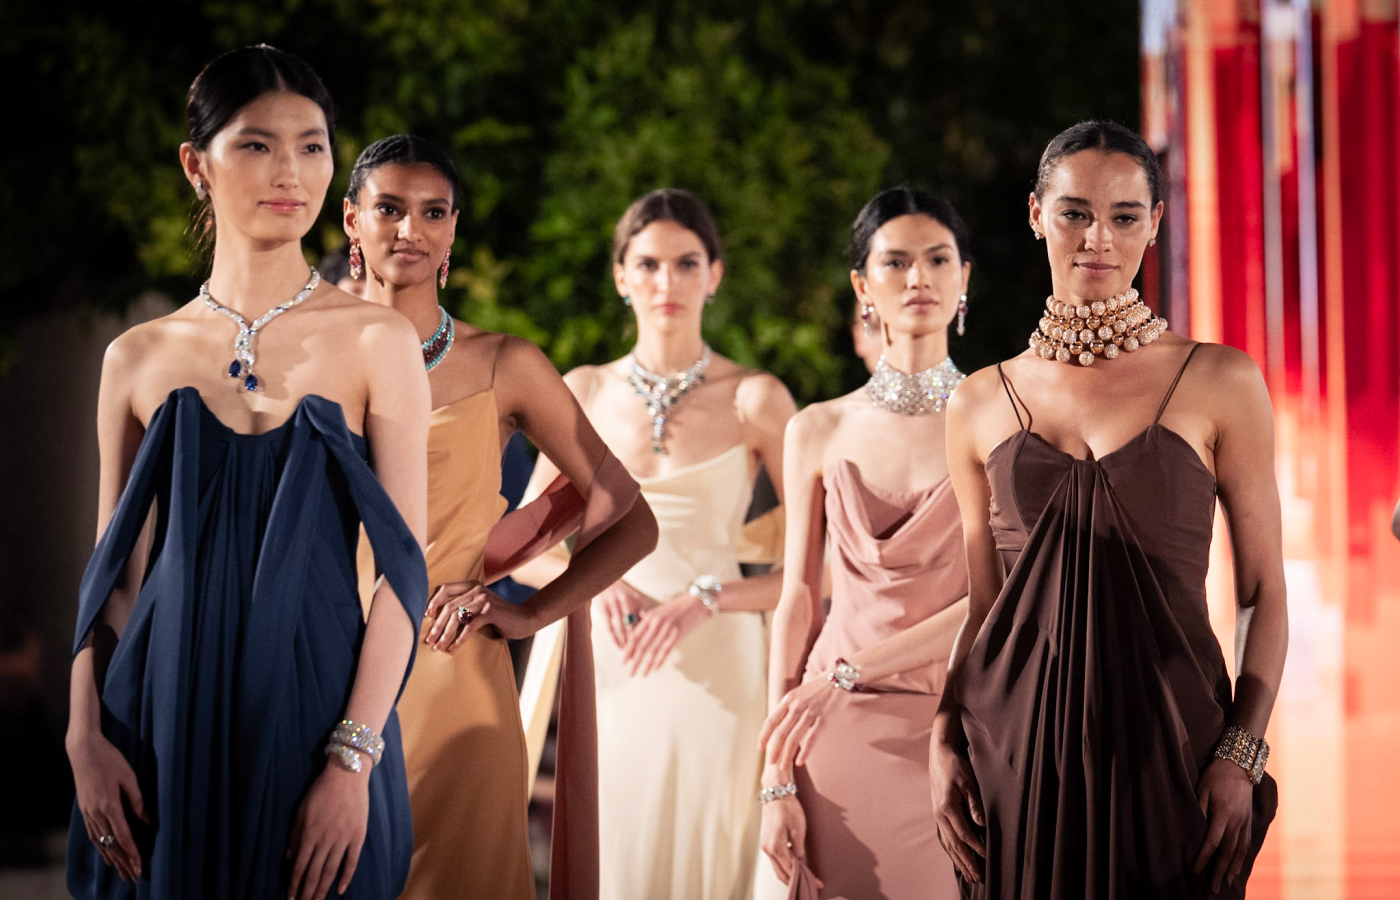 Models wearing new creations from the Bulgari Aeterna High Jewellery collection at the official launch event at the Terme di Diocleziano in Rome. Photo credit Gabriel De La Chapelle